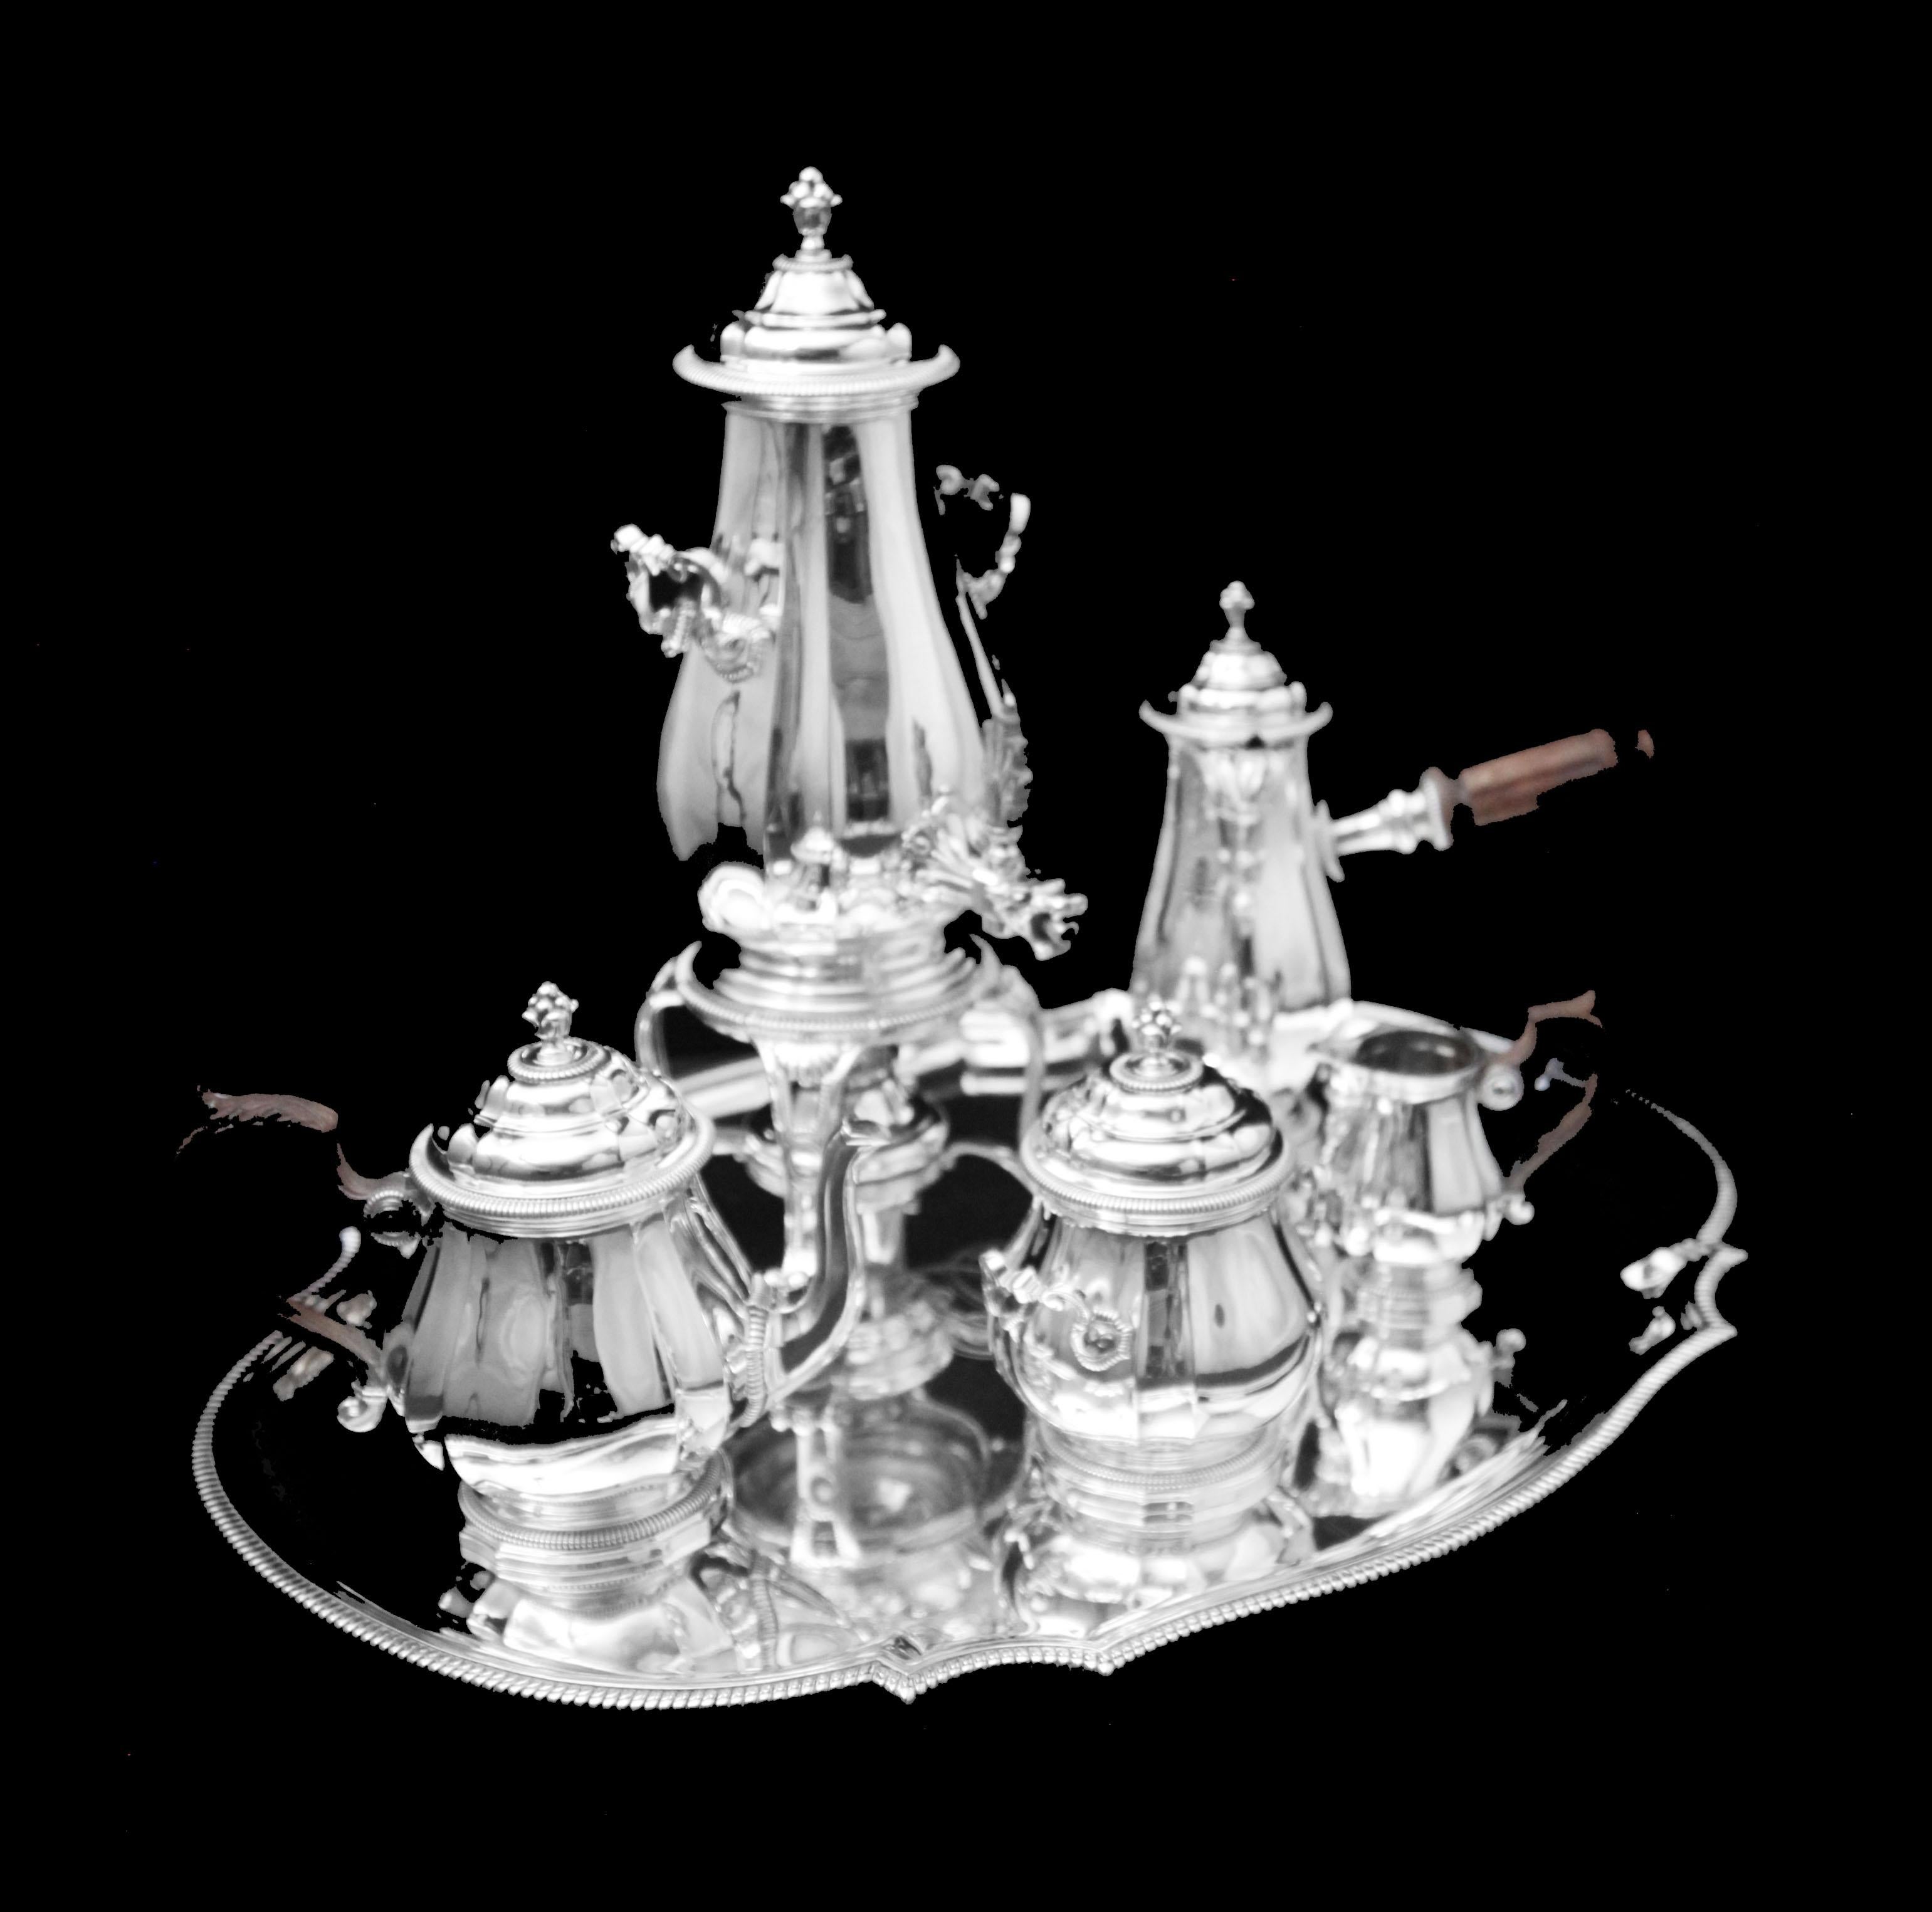 Louis XVI Boin-Taburet: 6pc. Antique French 950 Sterling Silver Tea Set - Like New! For Sale